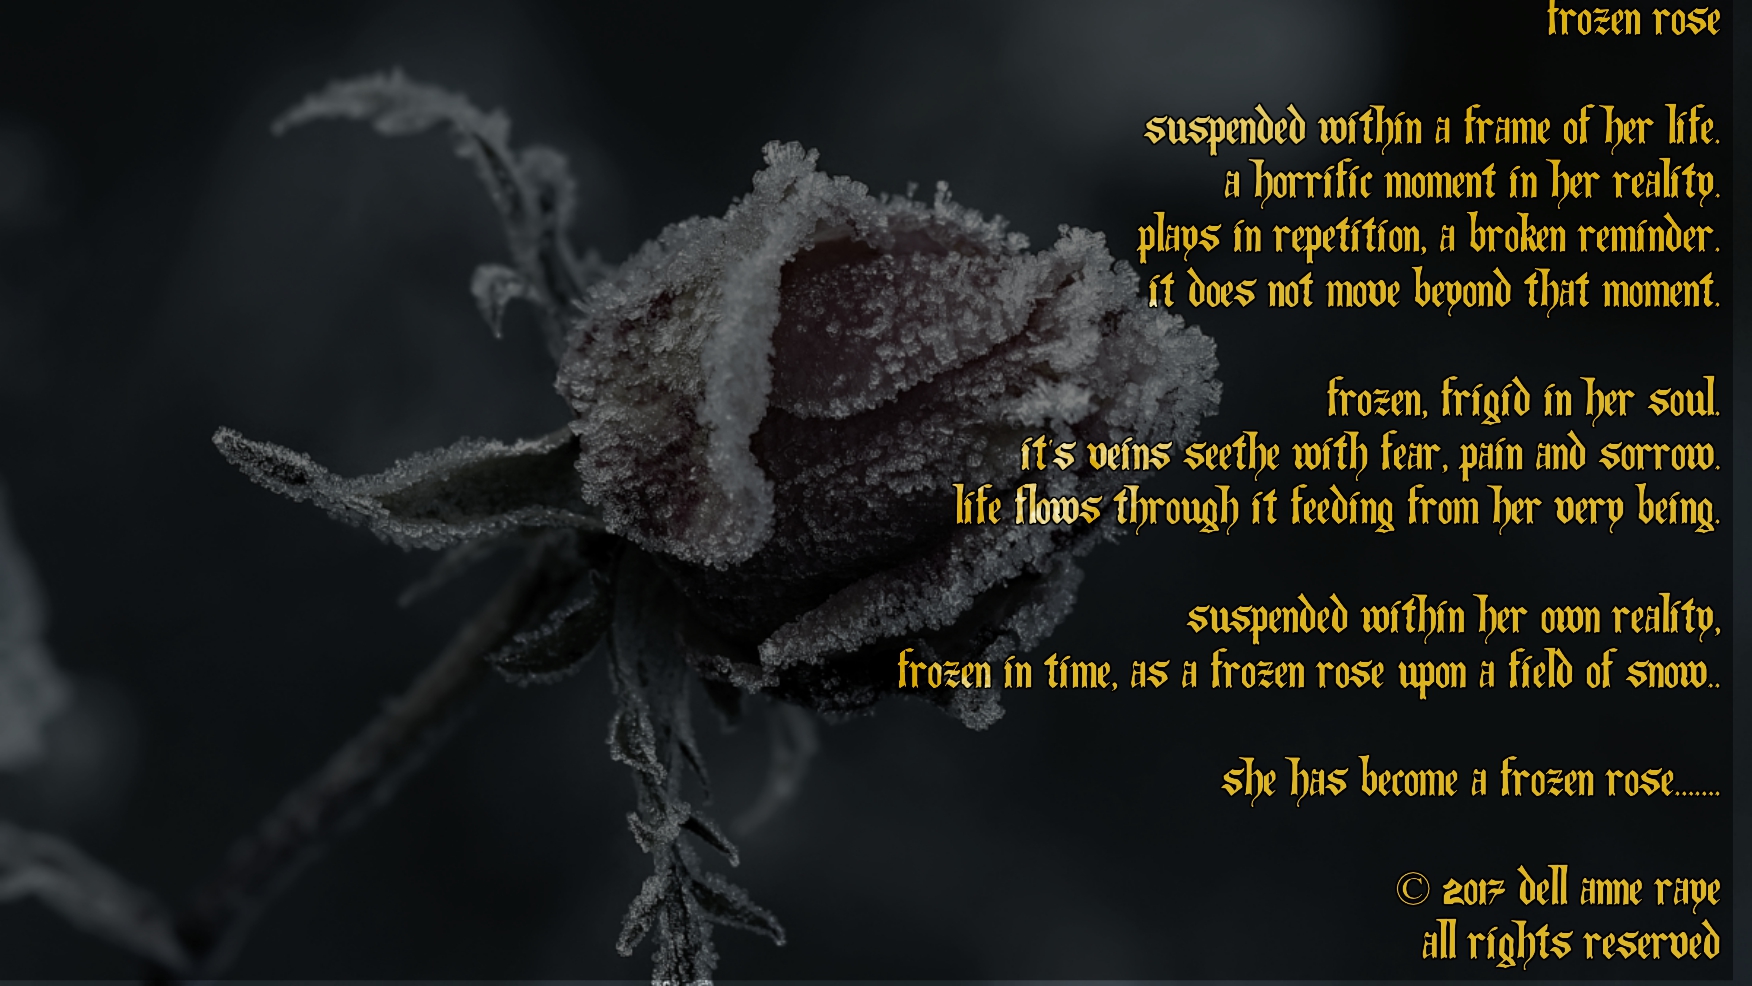 The Frozen Rose